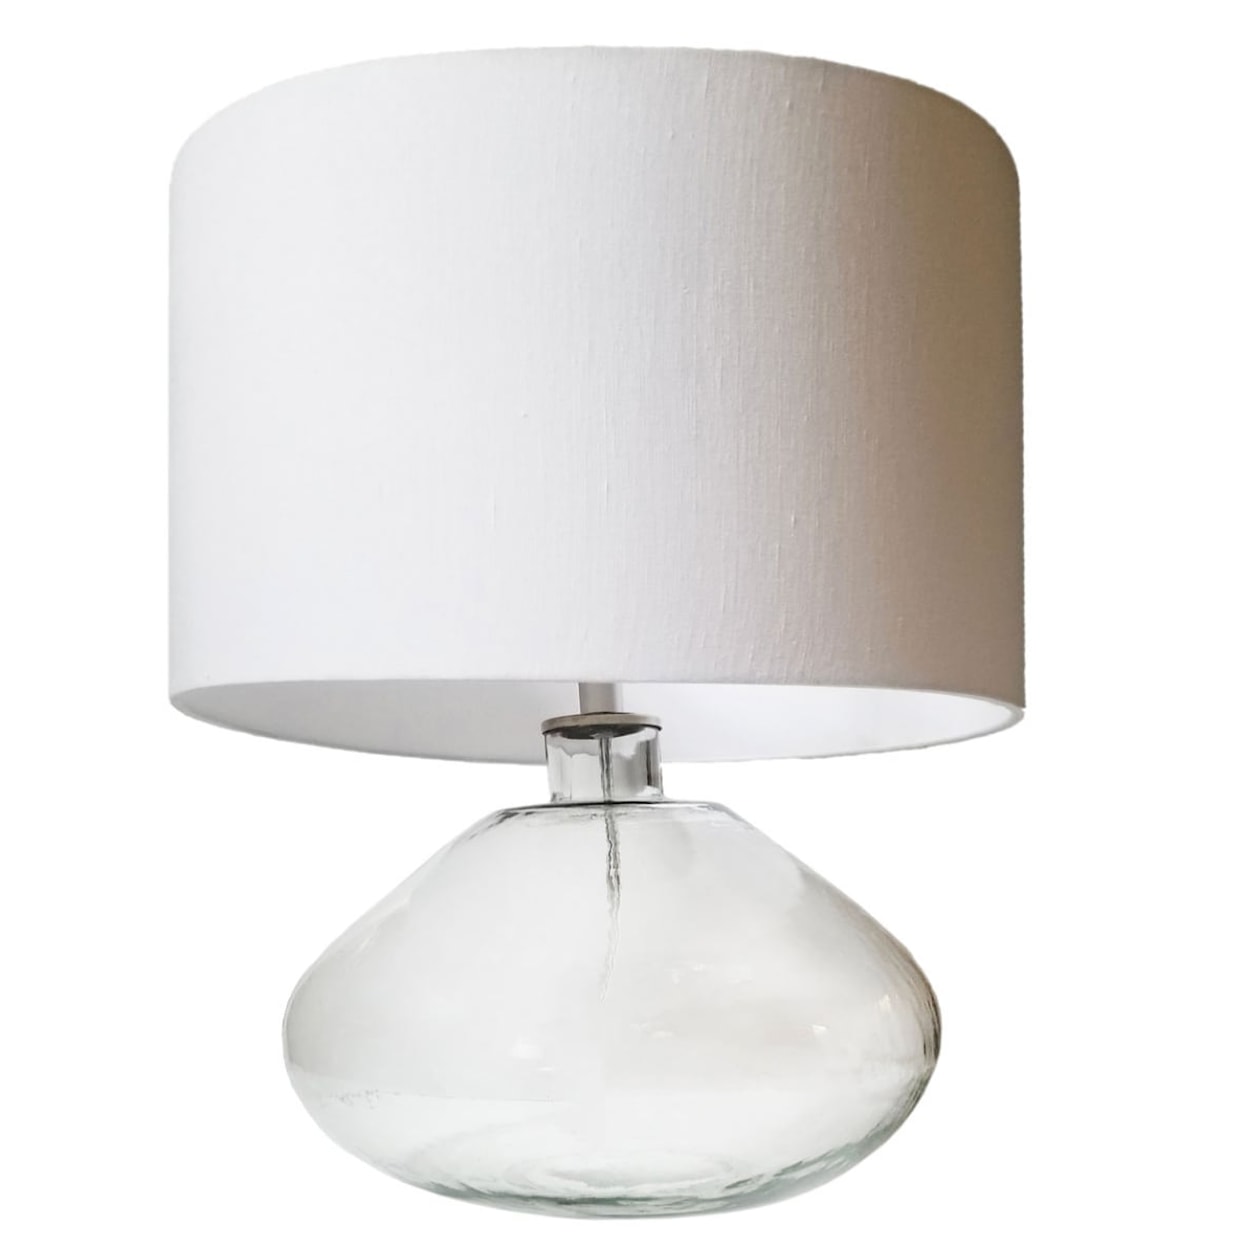 Dovetail Furniture Accessories Suzanne Table Lamp